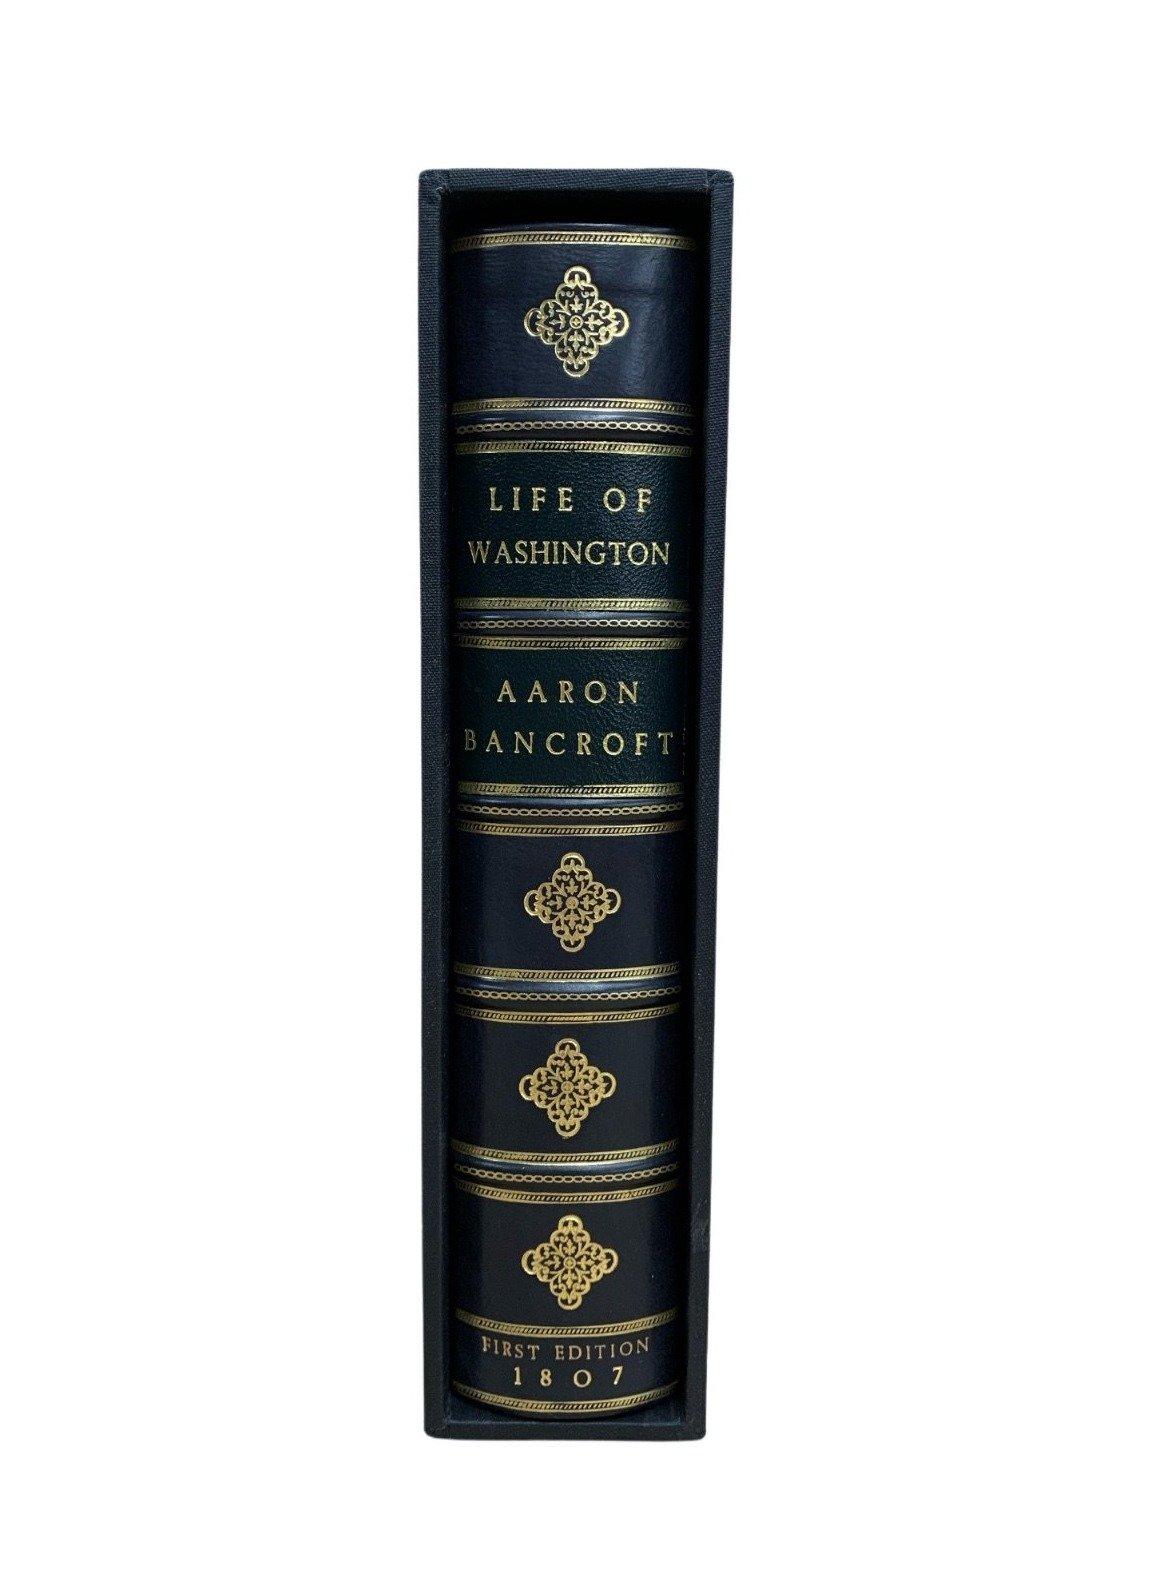 Early 19th Century Essay on the Life of George Washington by Aaron Bancroft, First Edition, 1807